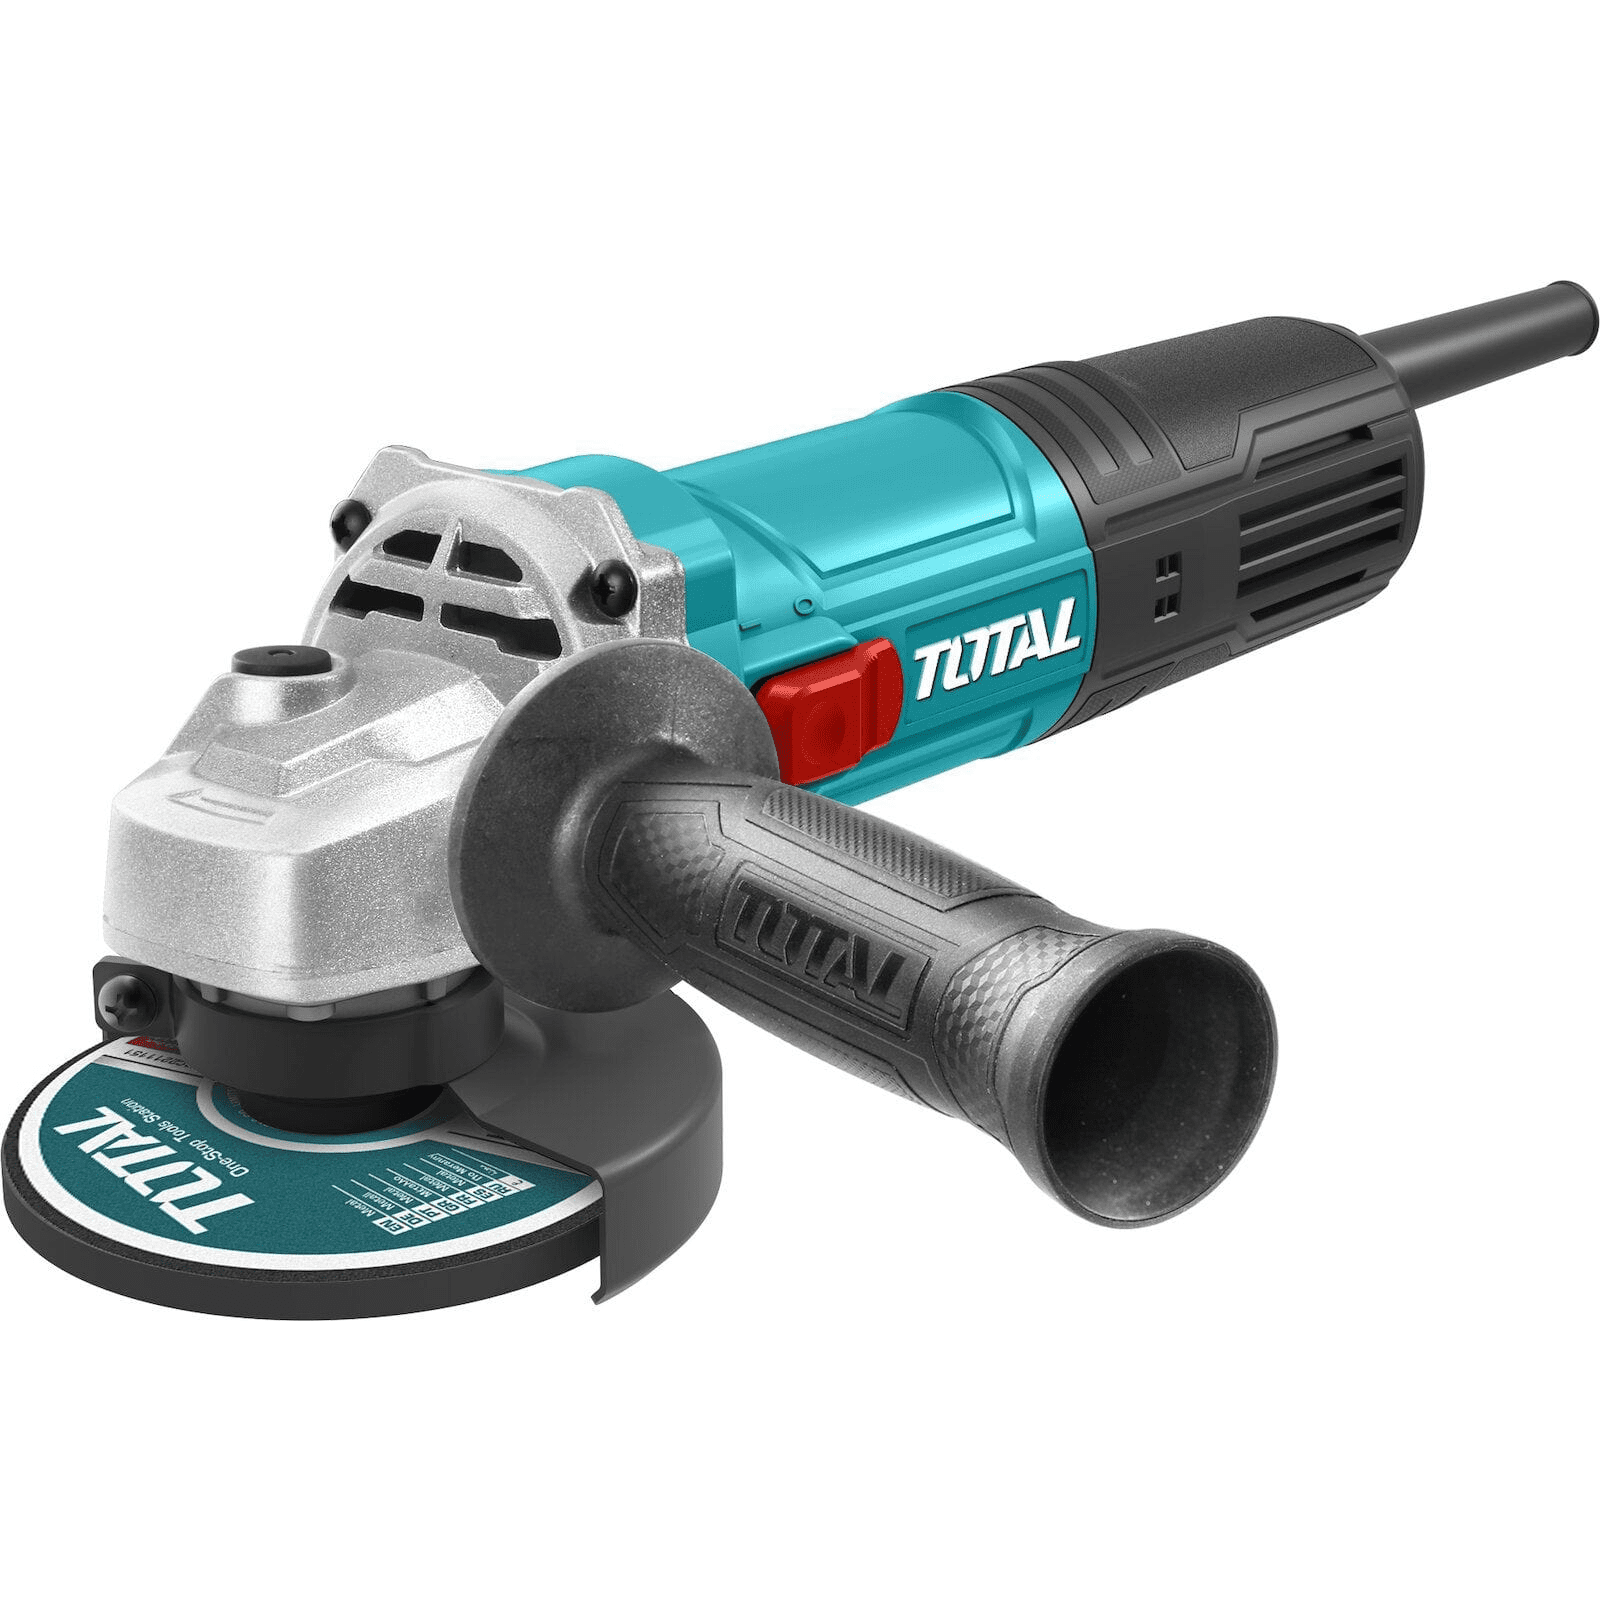 Total 5" Angle Grinder 900W - TG109125565 | Supply Master | Accra, Ghana Tools Building Steel Engineering Hardware tool